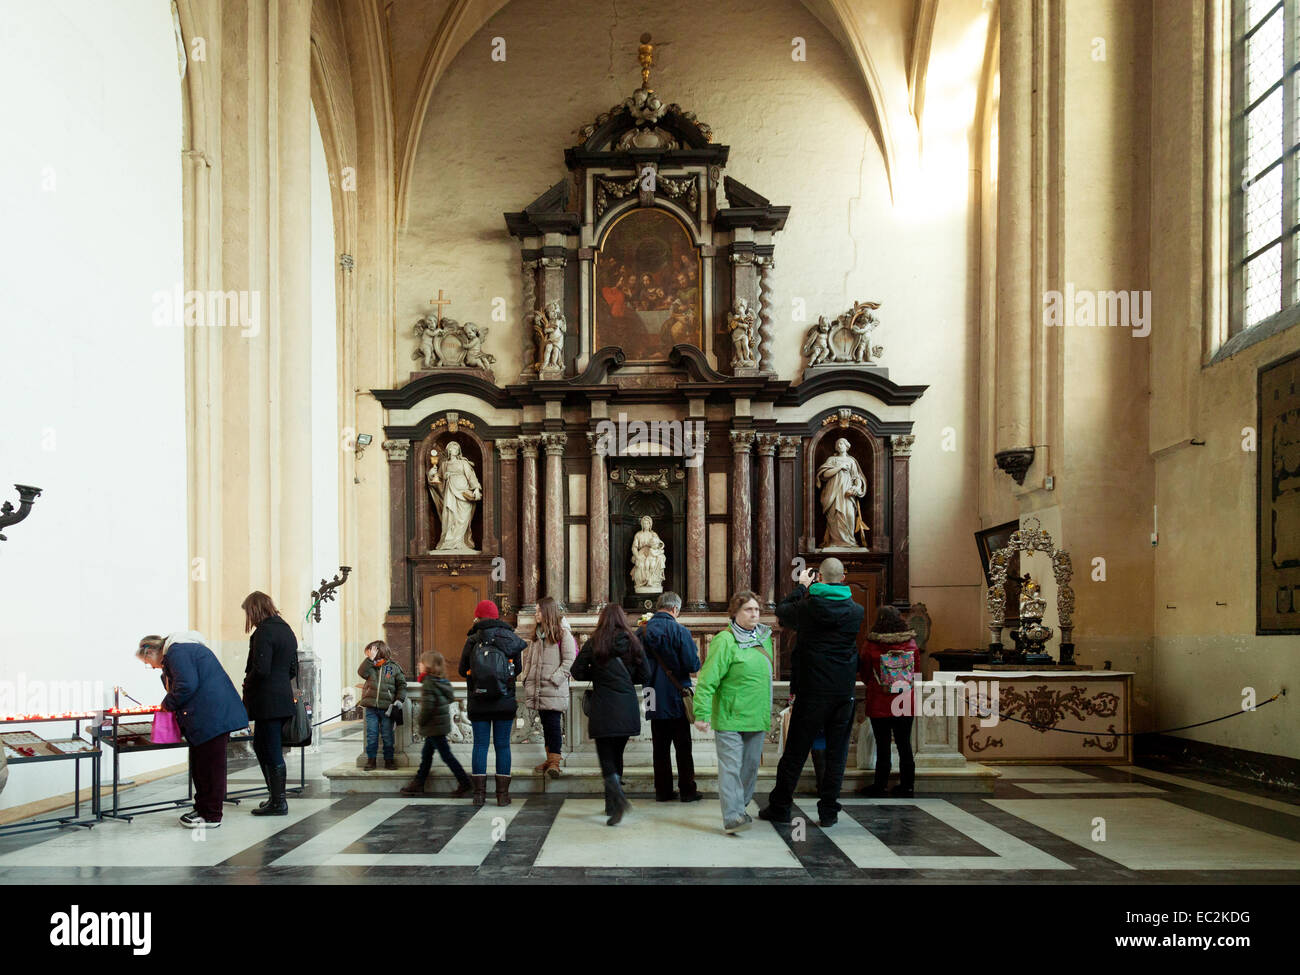 People looking at the statue of ' Madonna and Child ' by Michaelangelo, in the Church of Our lady, Bruges ( Brugge ), Belgium Stock Photo